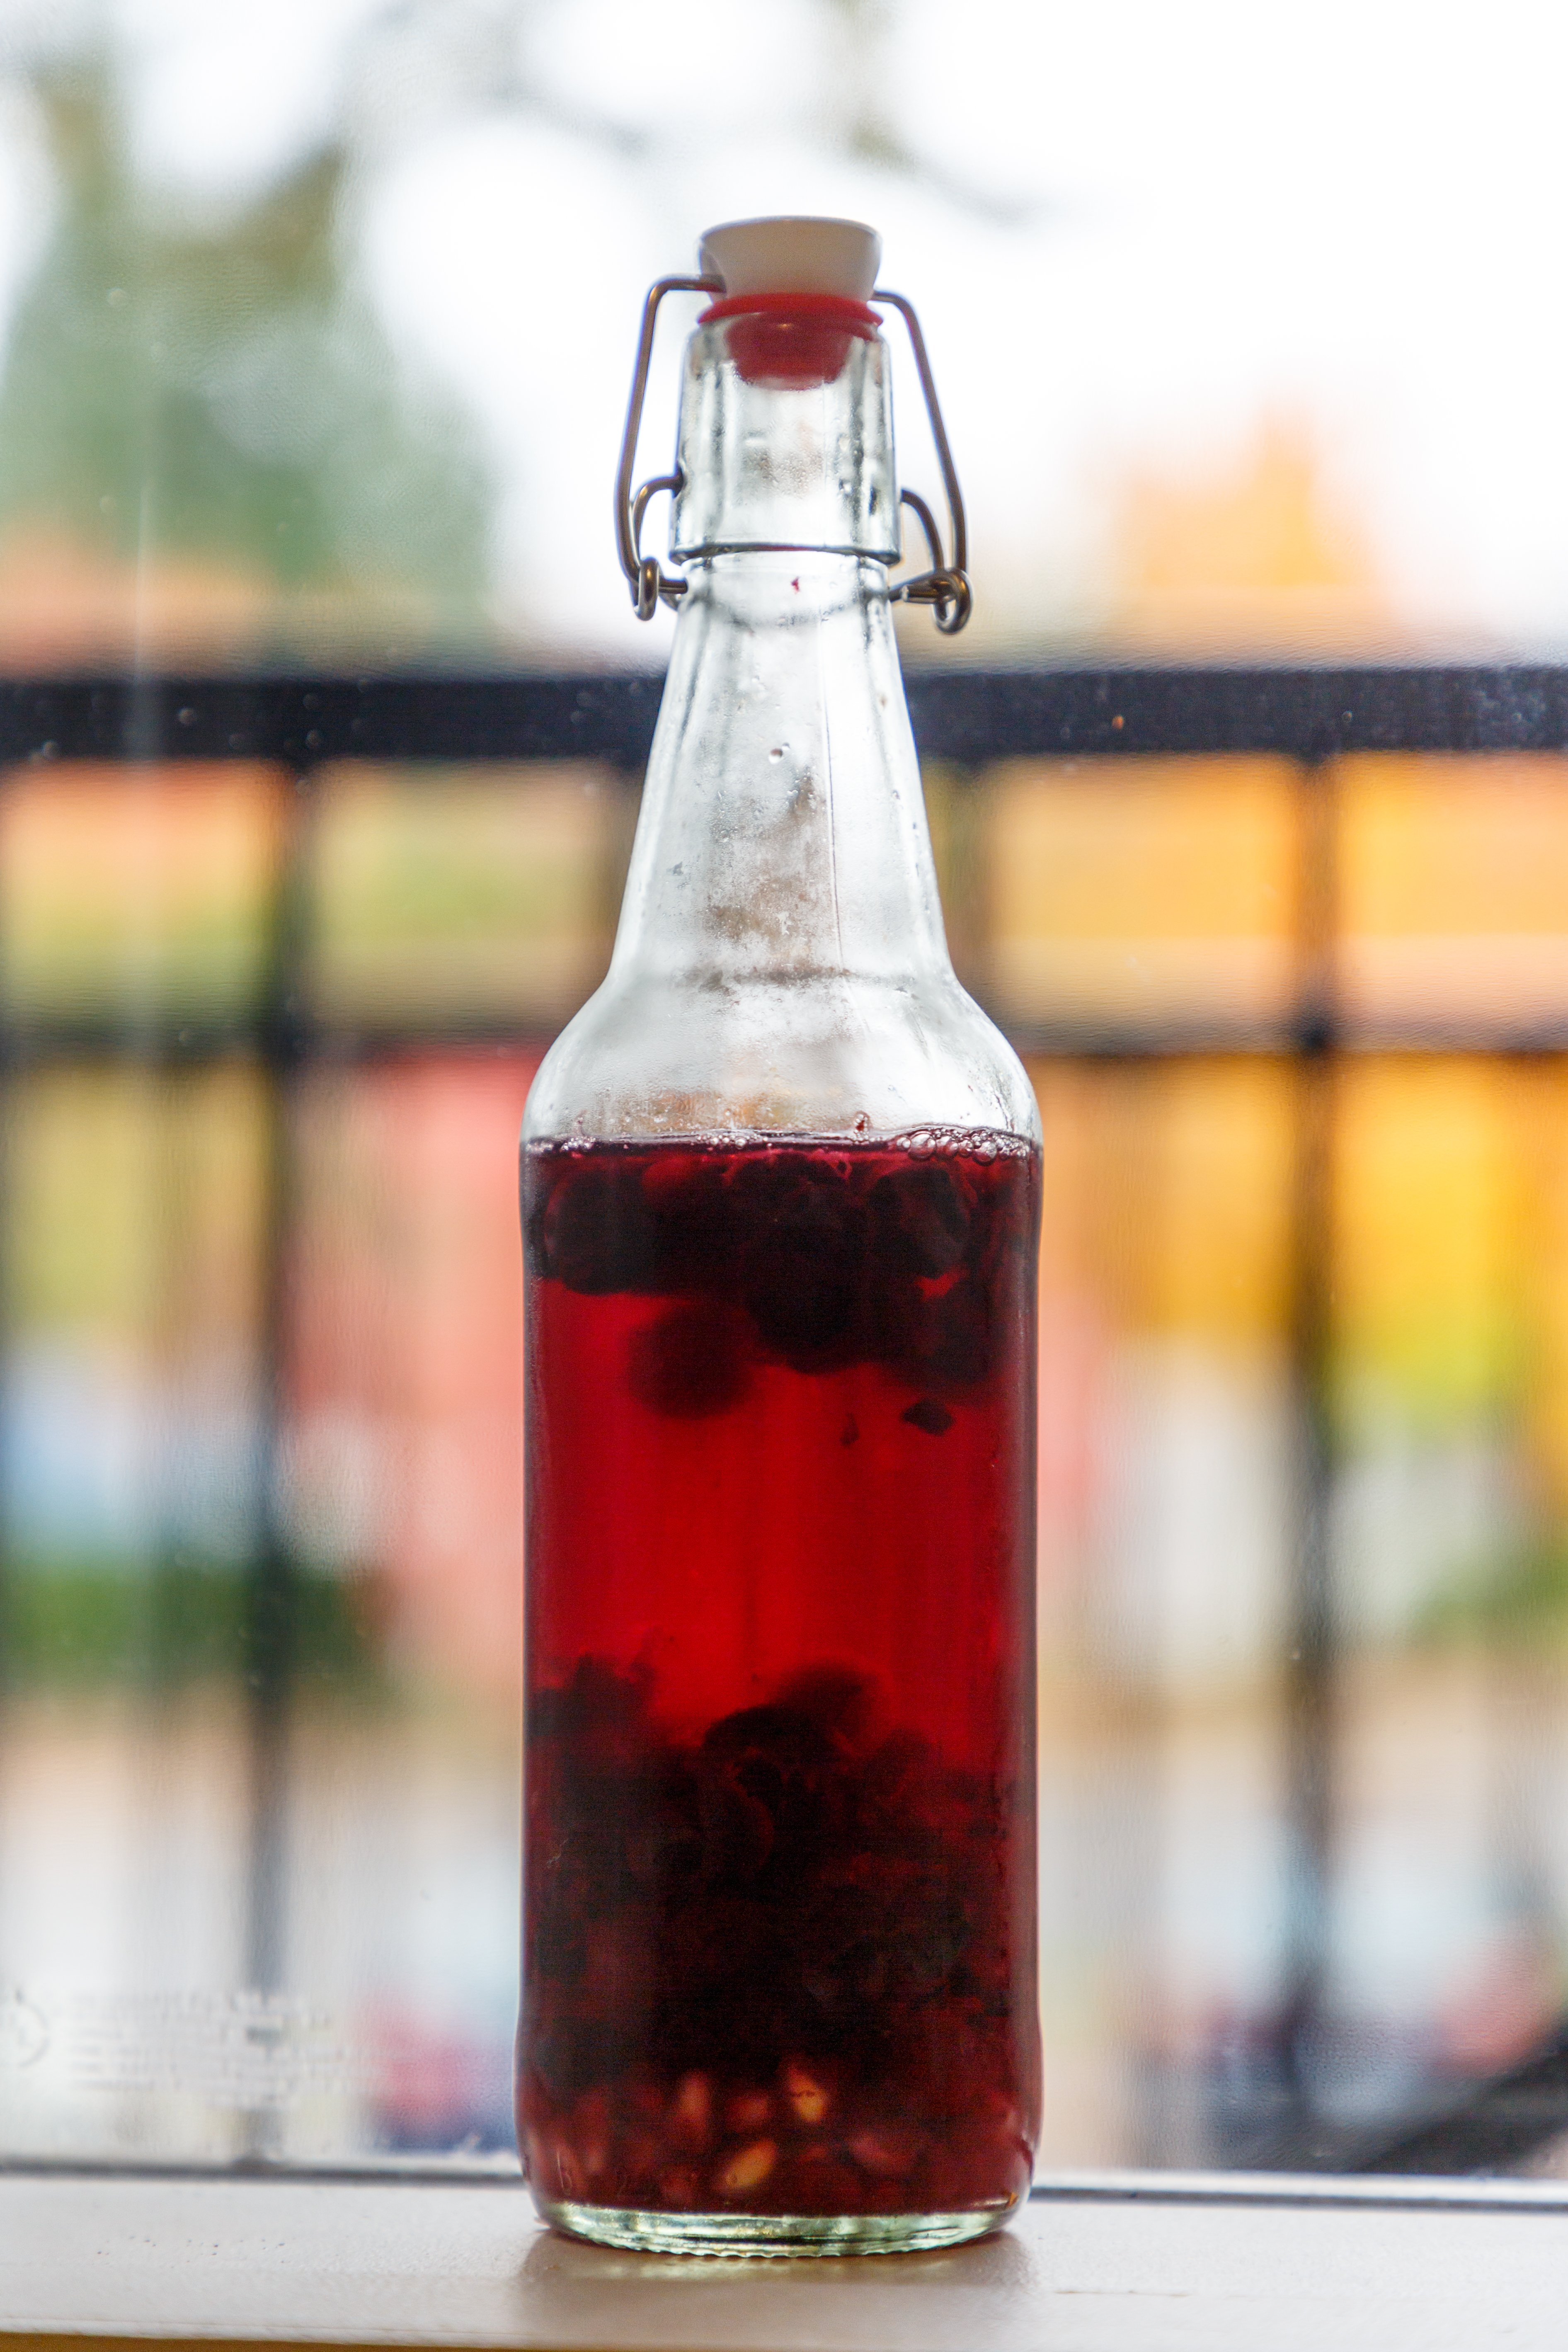 Brewing Your Own Kombucha? In a Dorm?